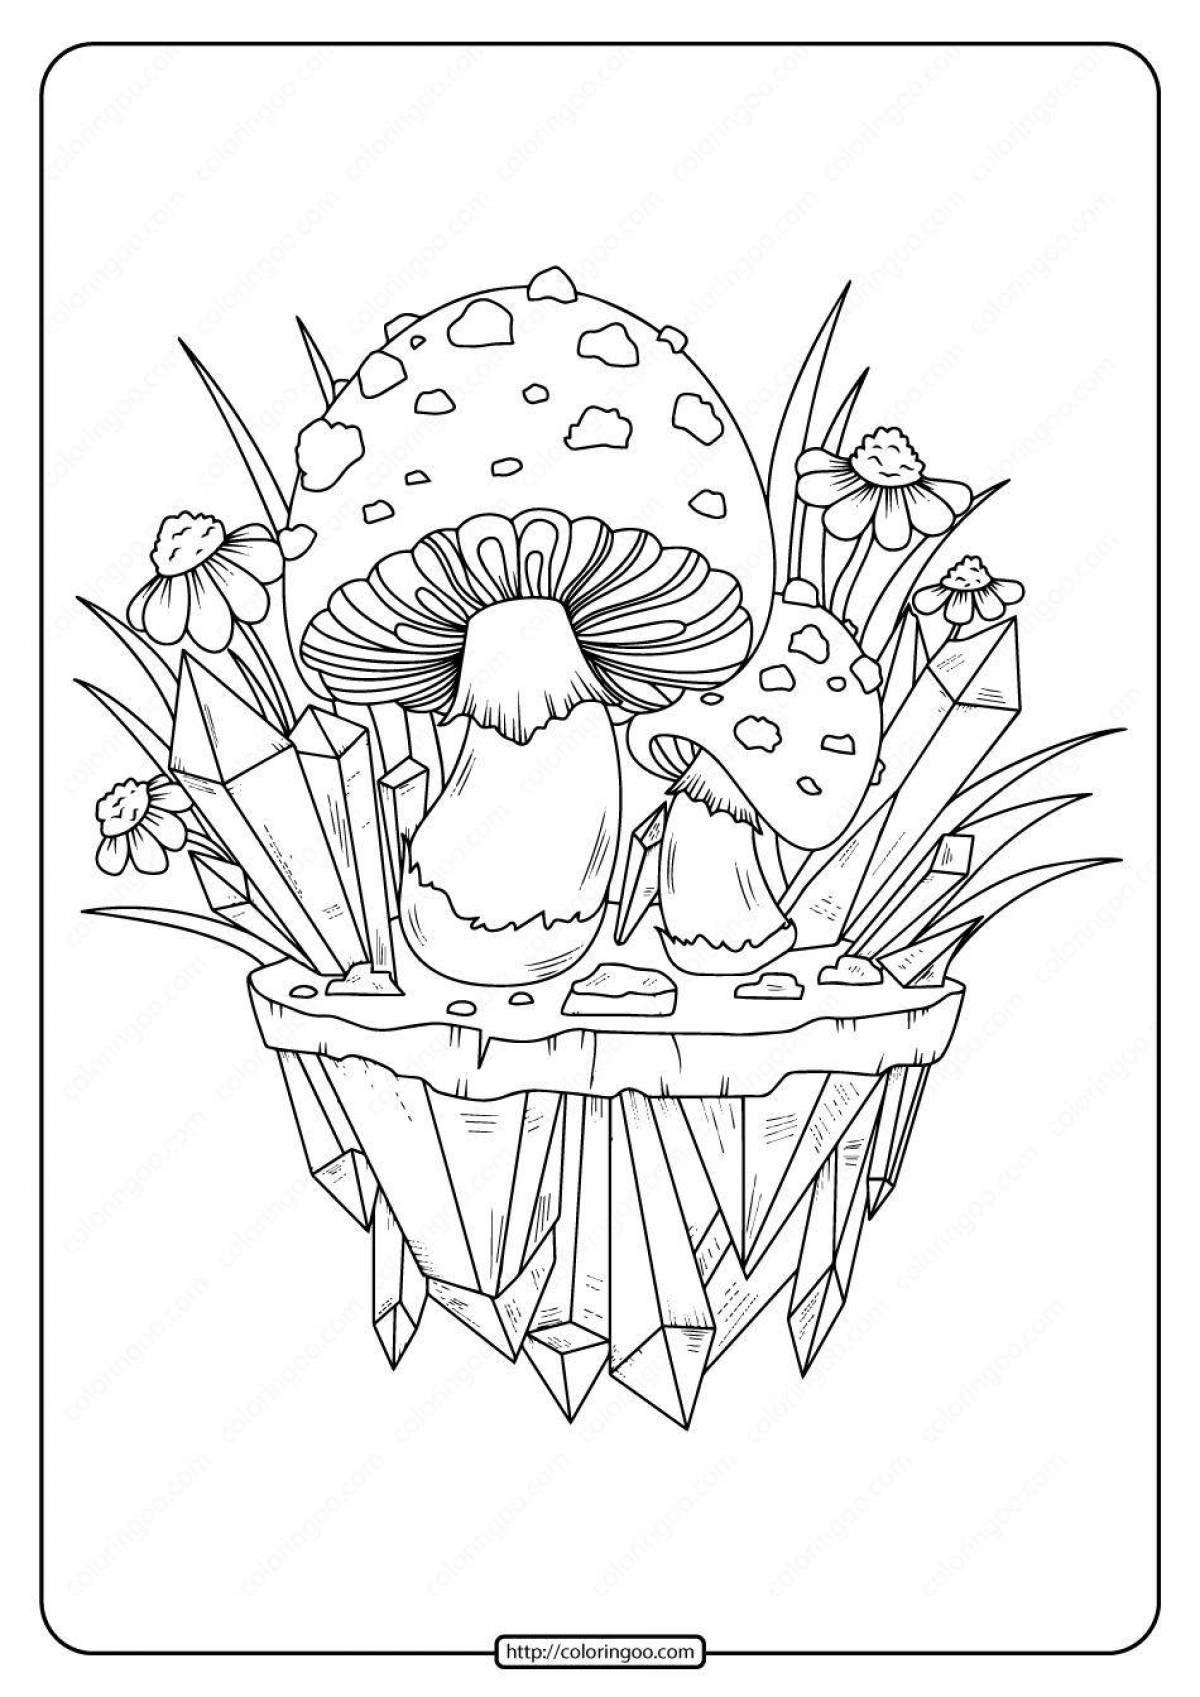 Coloring book shiny fly agaric frog